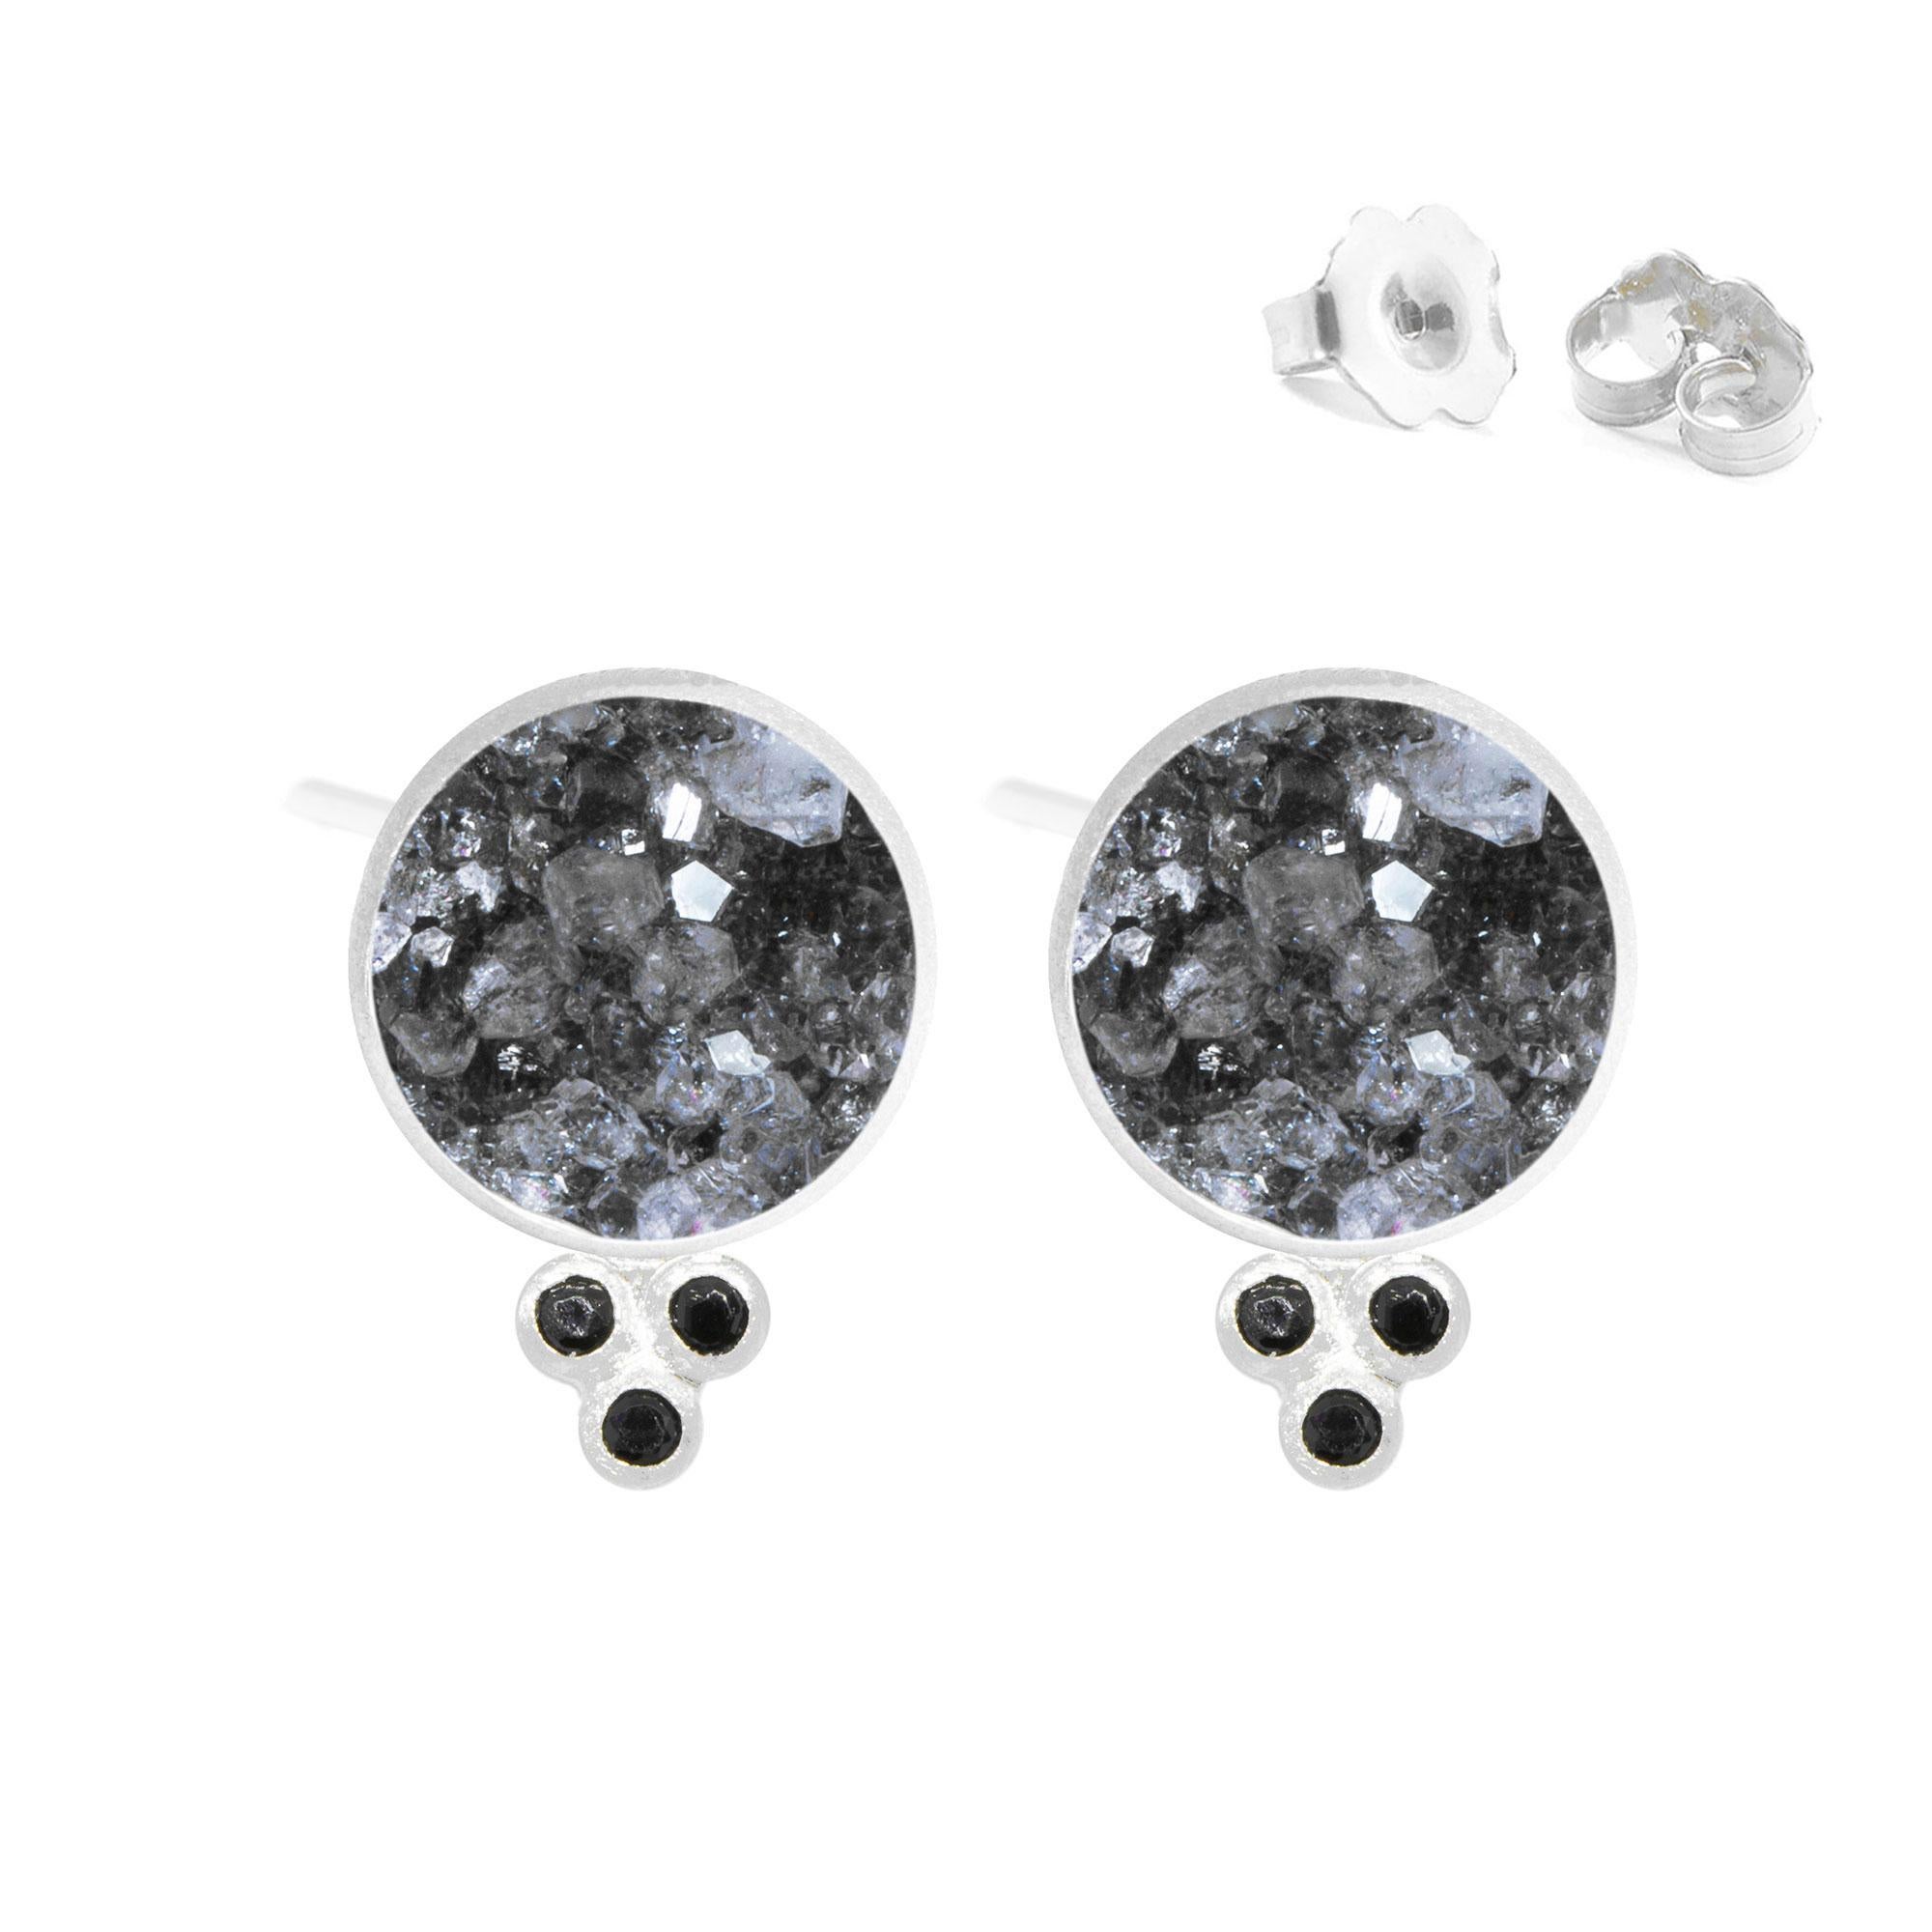 A Nina Nguyen classic: Our Chloe Silver Studs are designed with black druzy rimmed in silver, and accented with gemstones for some extra sparkle.
Nina Nguyen Design's patent-pending earrings have an element on the back of the stud or charm to allow